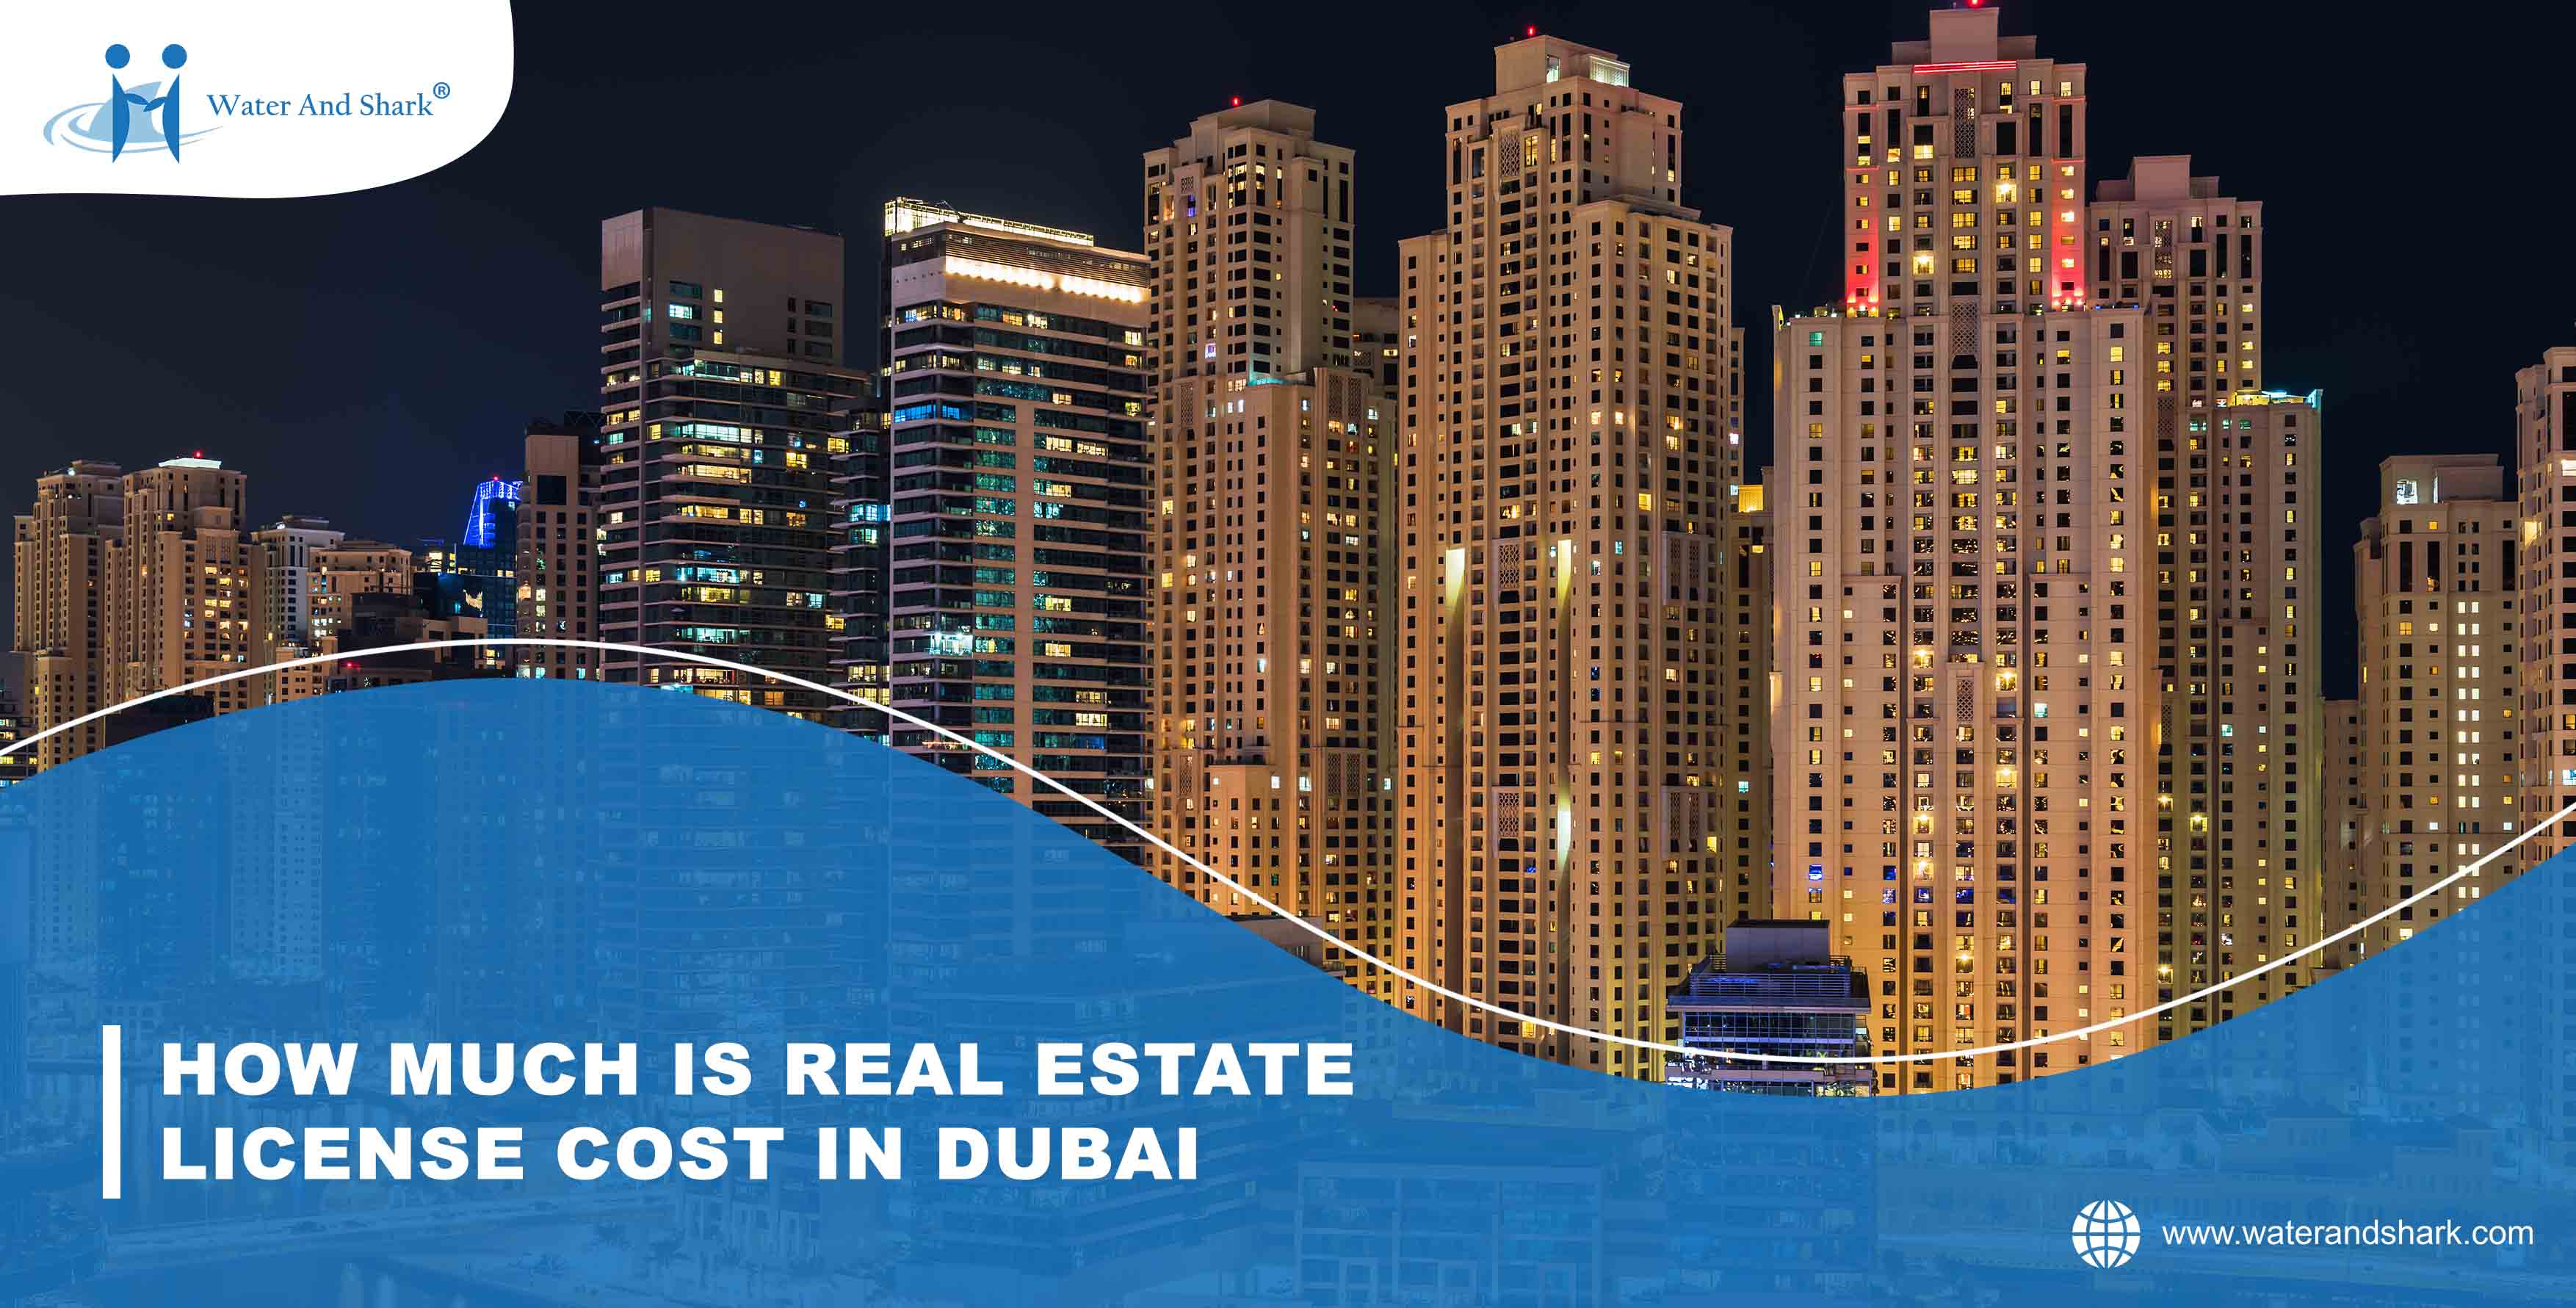 650x1280_HOW_MUCH_IS_REAL_ESTATE_LICENSE_COST_IN_DUBAI_low_size.jpg